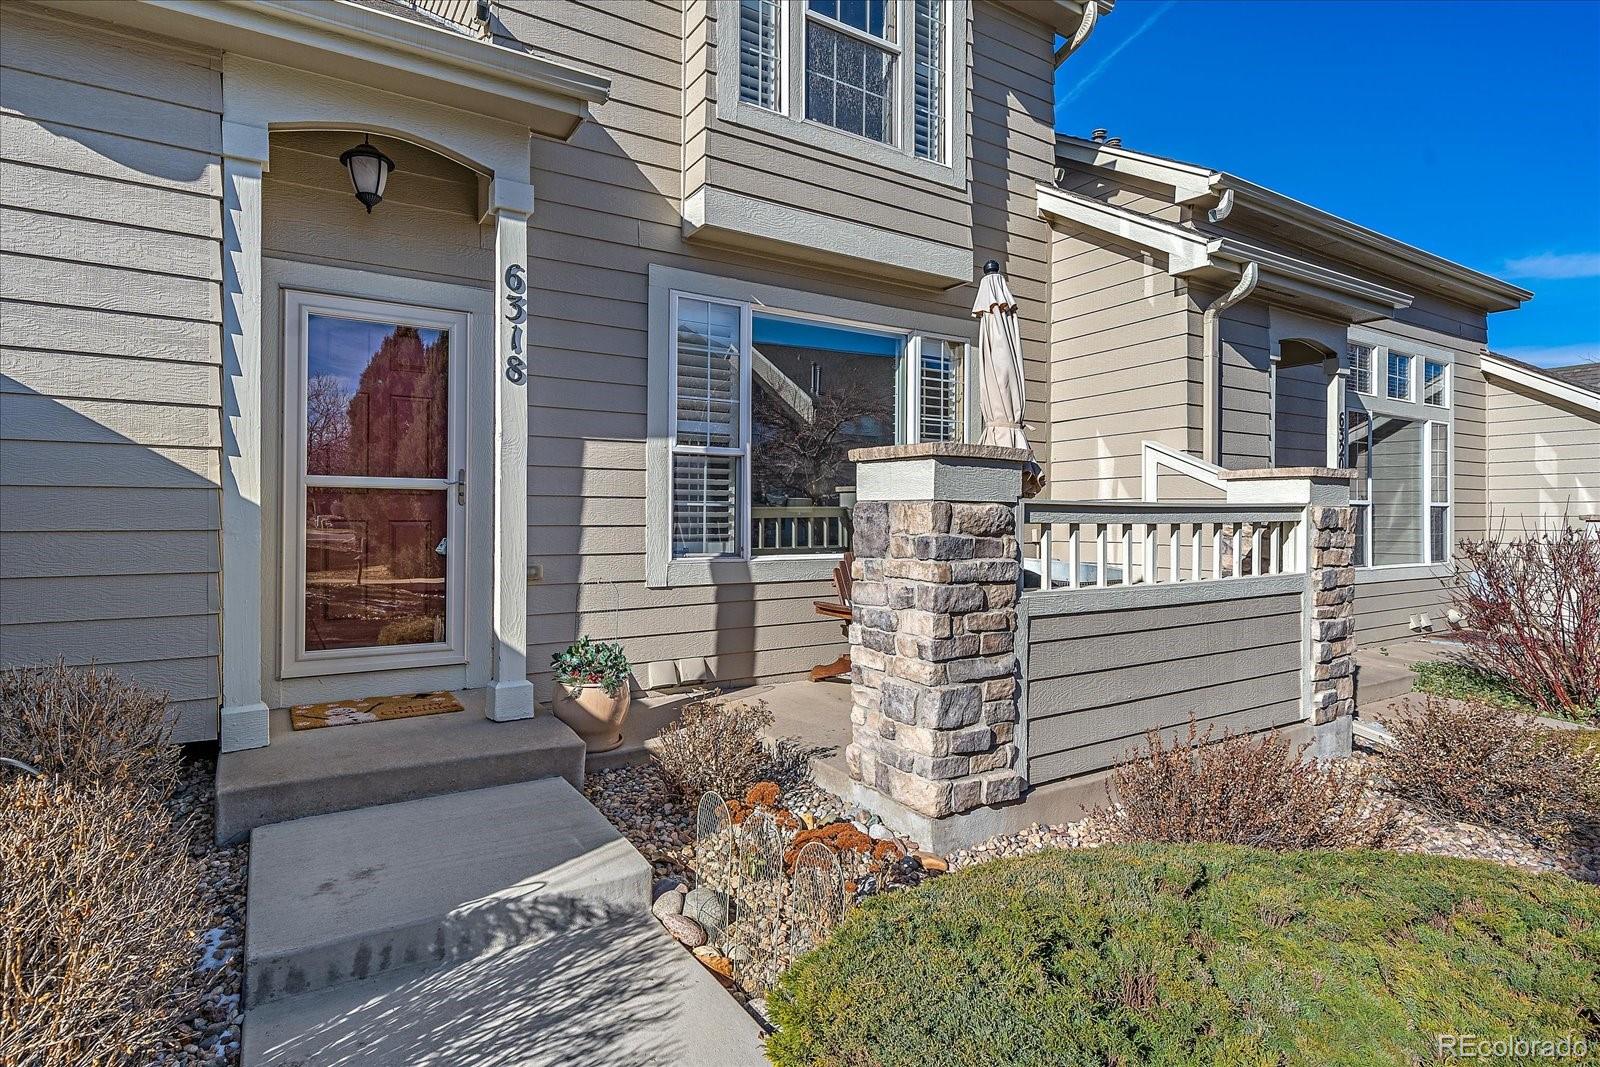 6318  trailhead road, Highlands Ranch sold home. Closed on 2023-12-28 for $525,000.